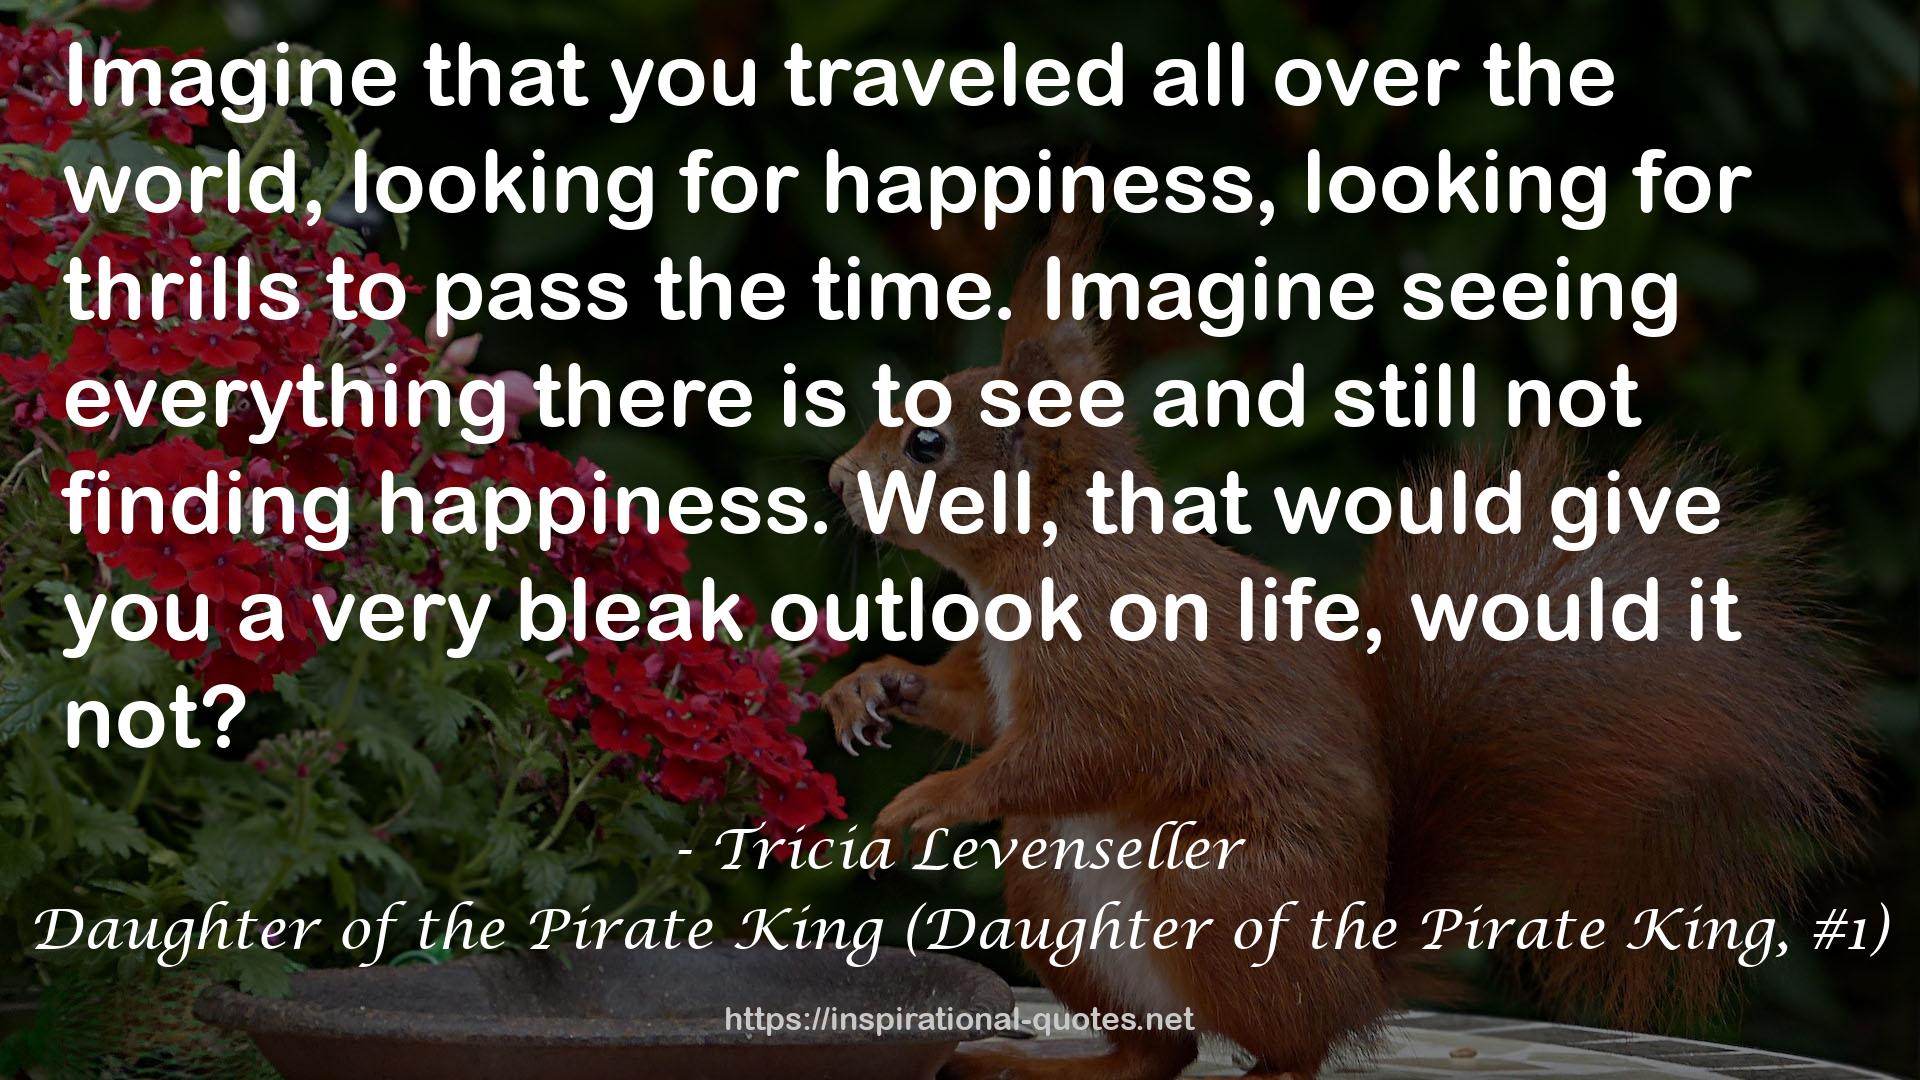 Daughter of the Pirate King (Daughter of the Pirate King, #1) QUOTES